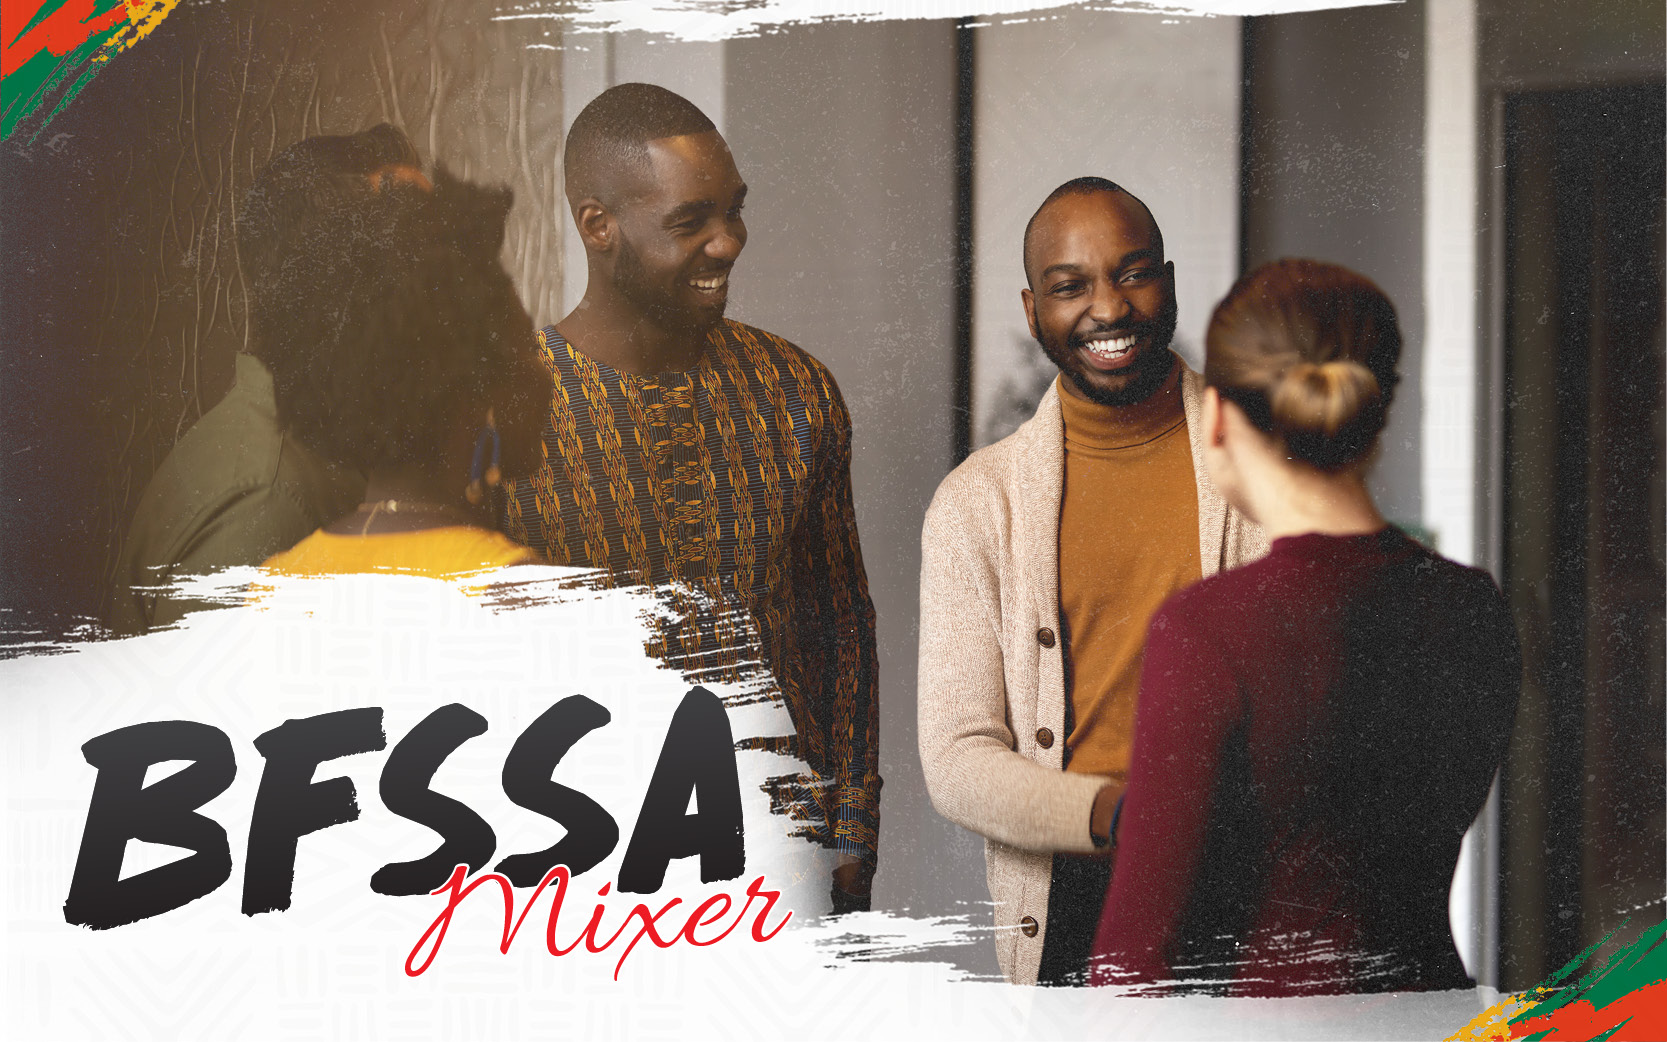 Flyer reads: BFSSA Mixer.  Image of students and faculty having a conversation.